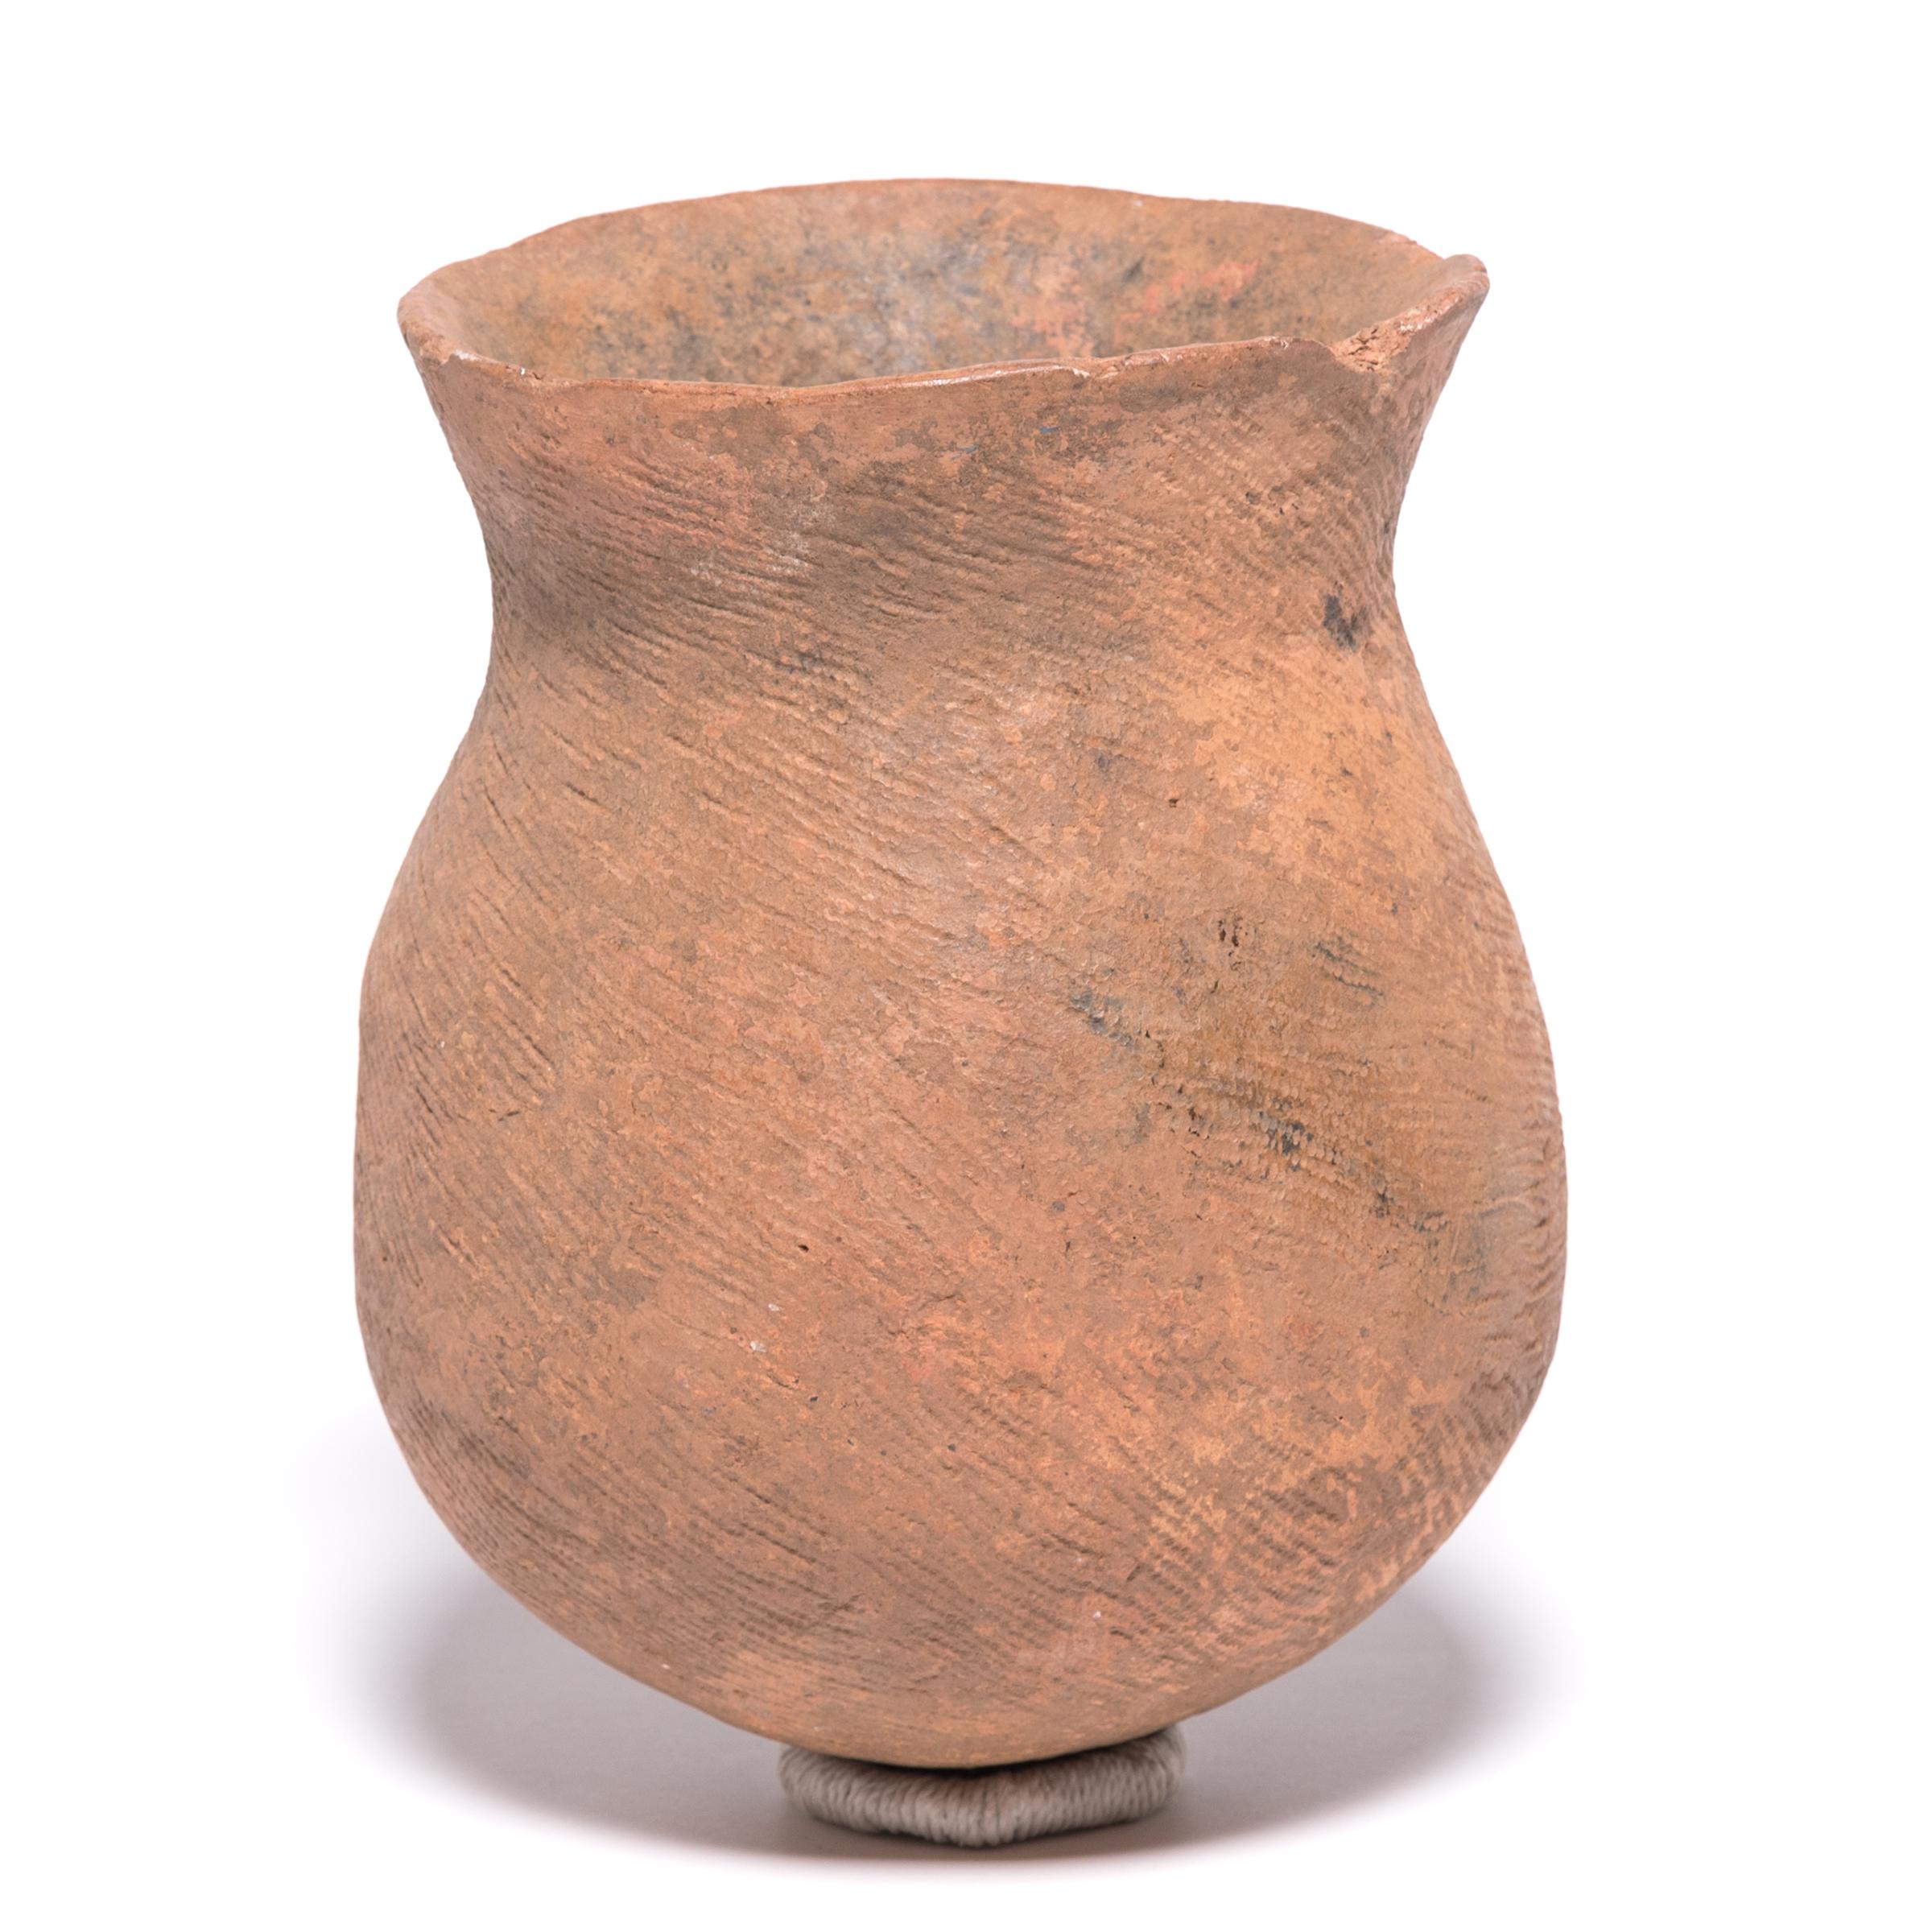 In spite of terracotta's naturally earthy and solid presence, this tribal storage vessel has a fantastic sense of movement. The hand incised scarifications swirl through the solid ceramic, pulling the eye from the base of the vessel in a smooth